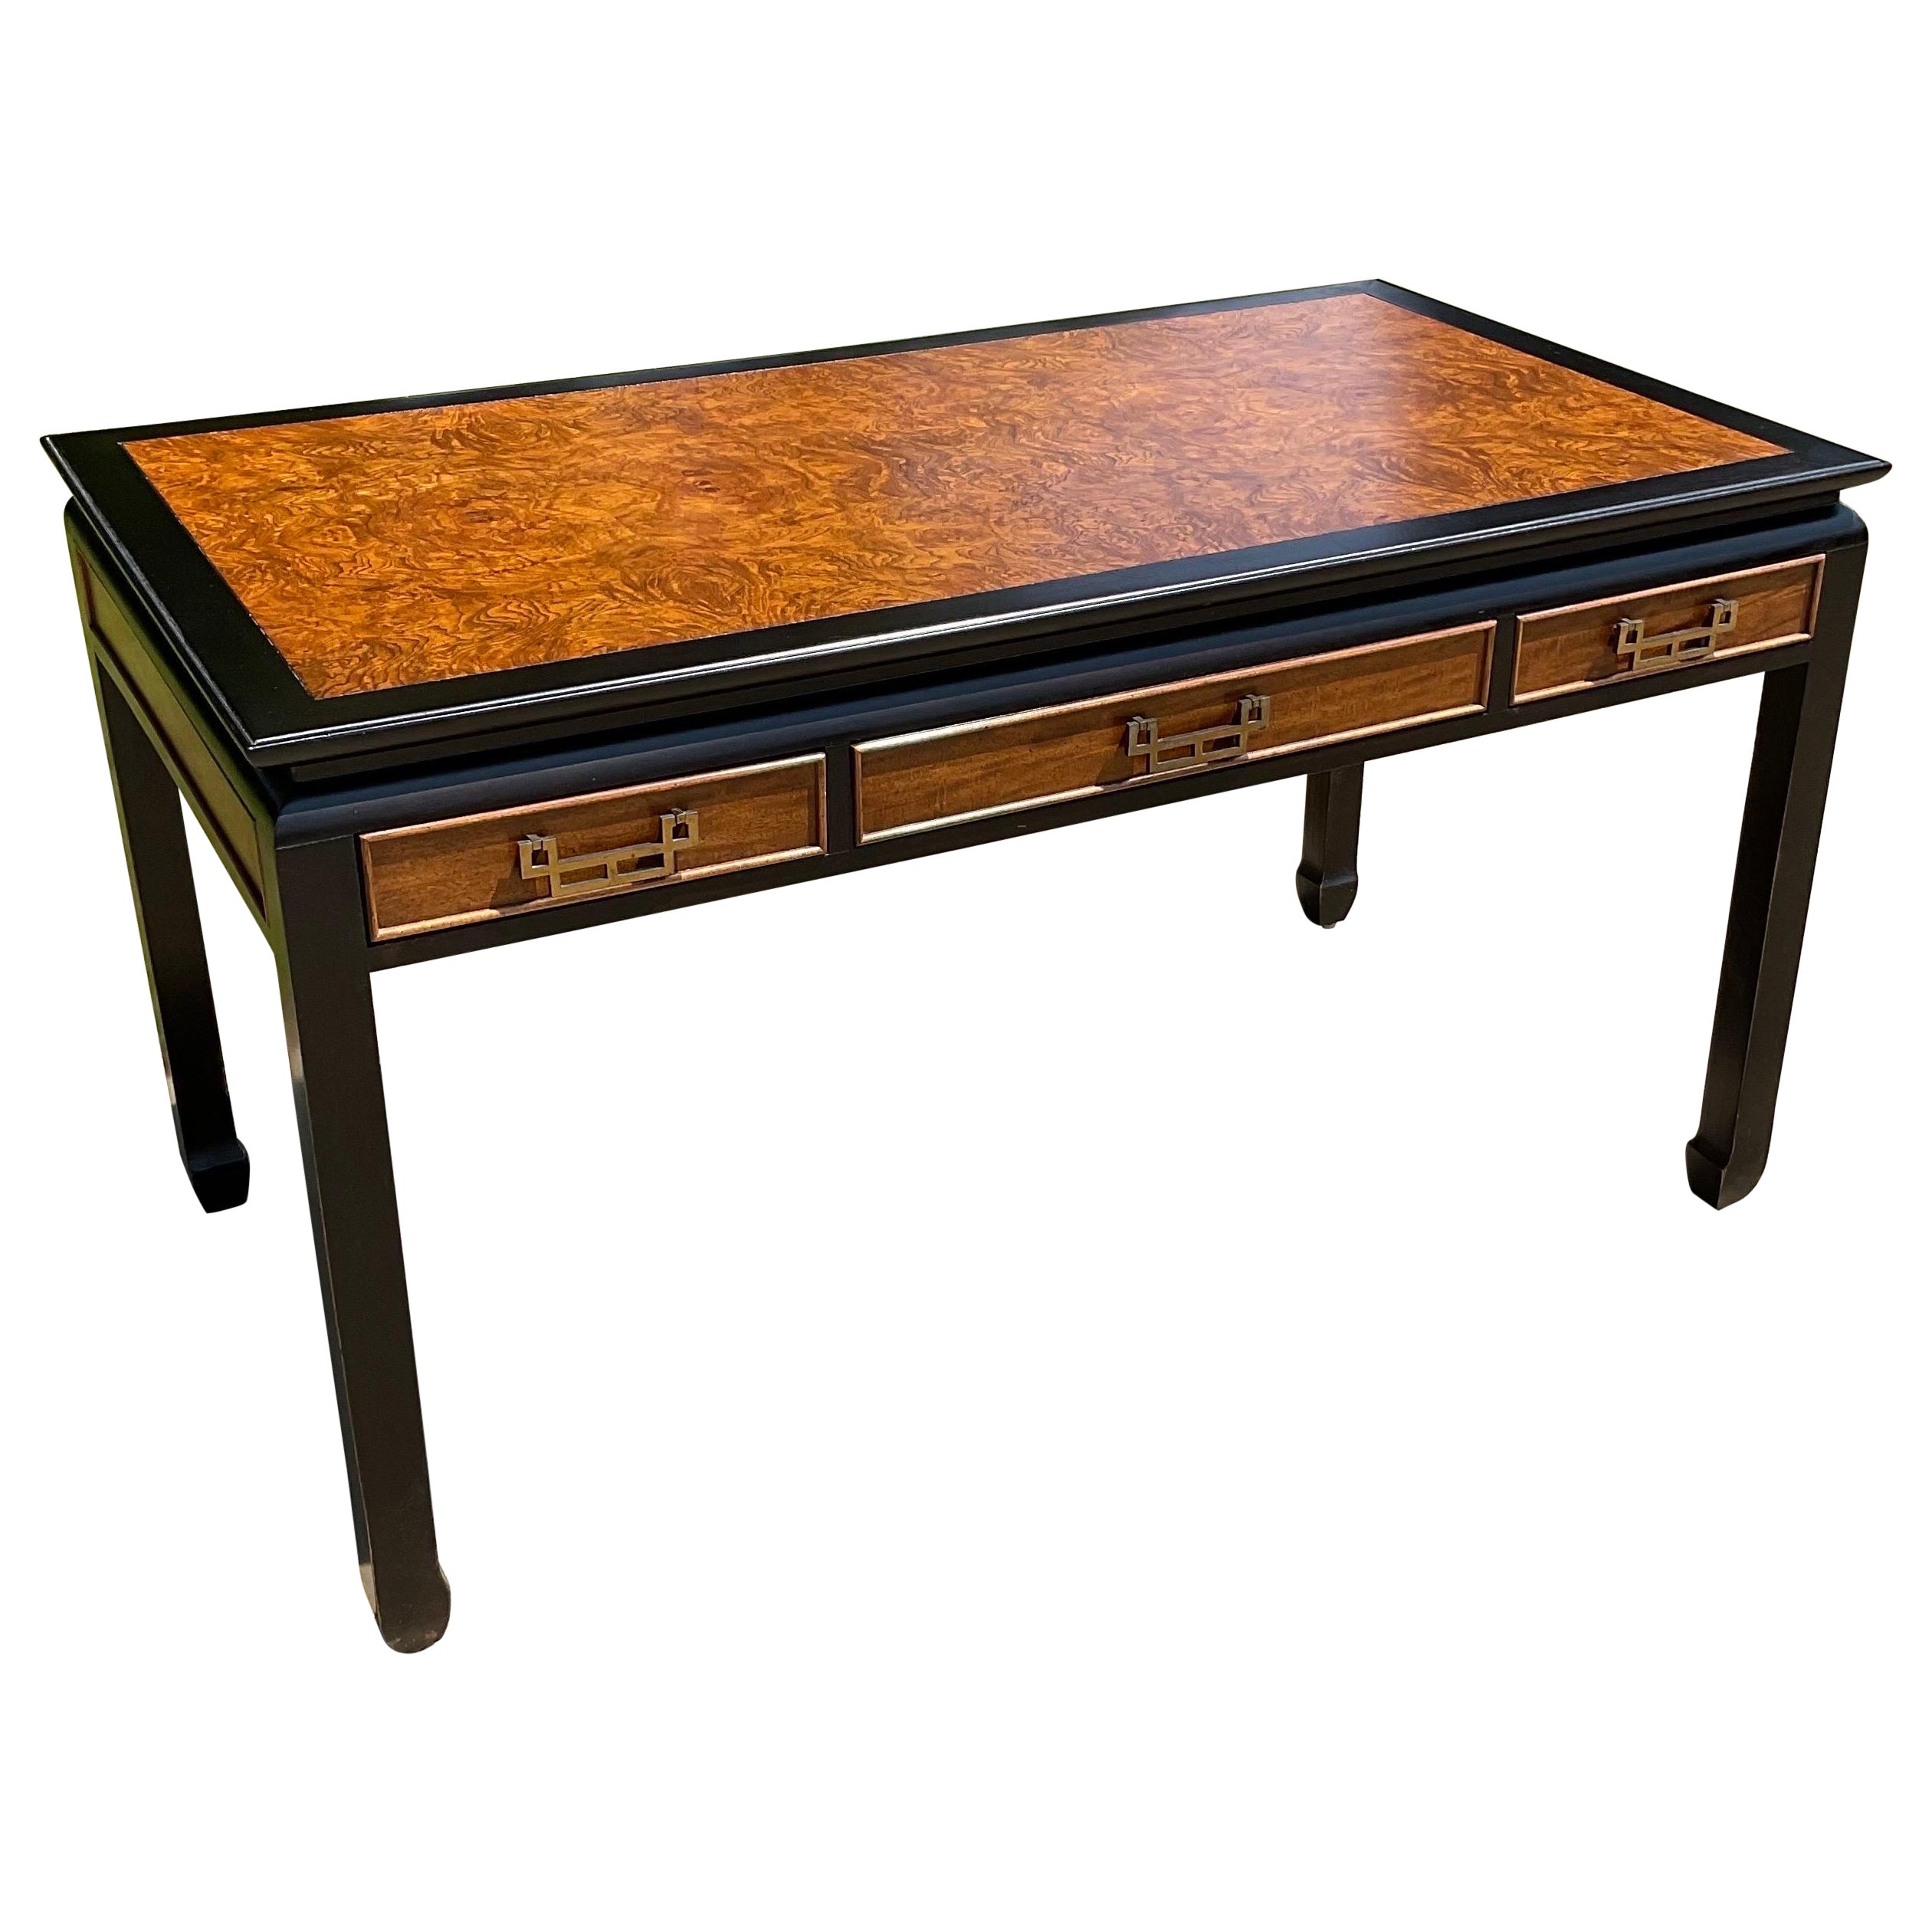 1970s Writing Desk From Century Furniture’s Chin Hua Collection by Raymond Sobot